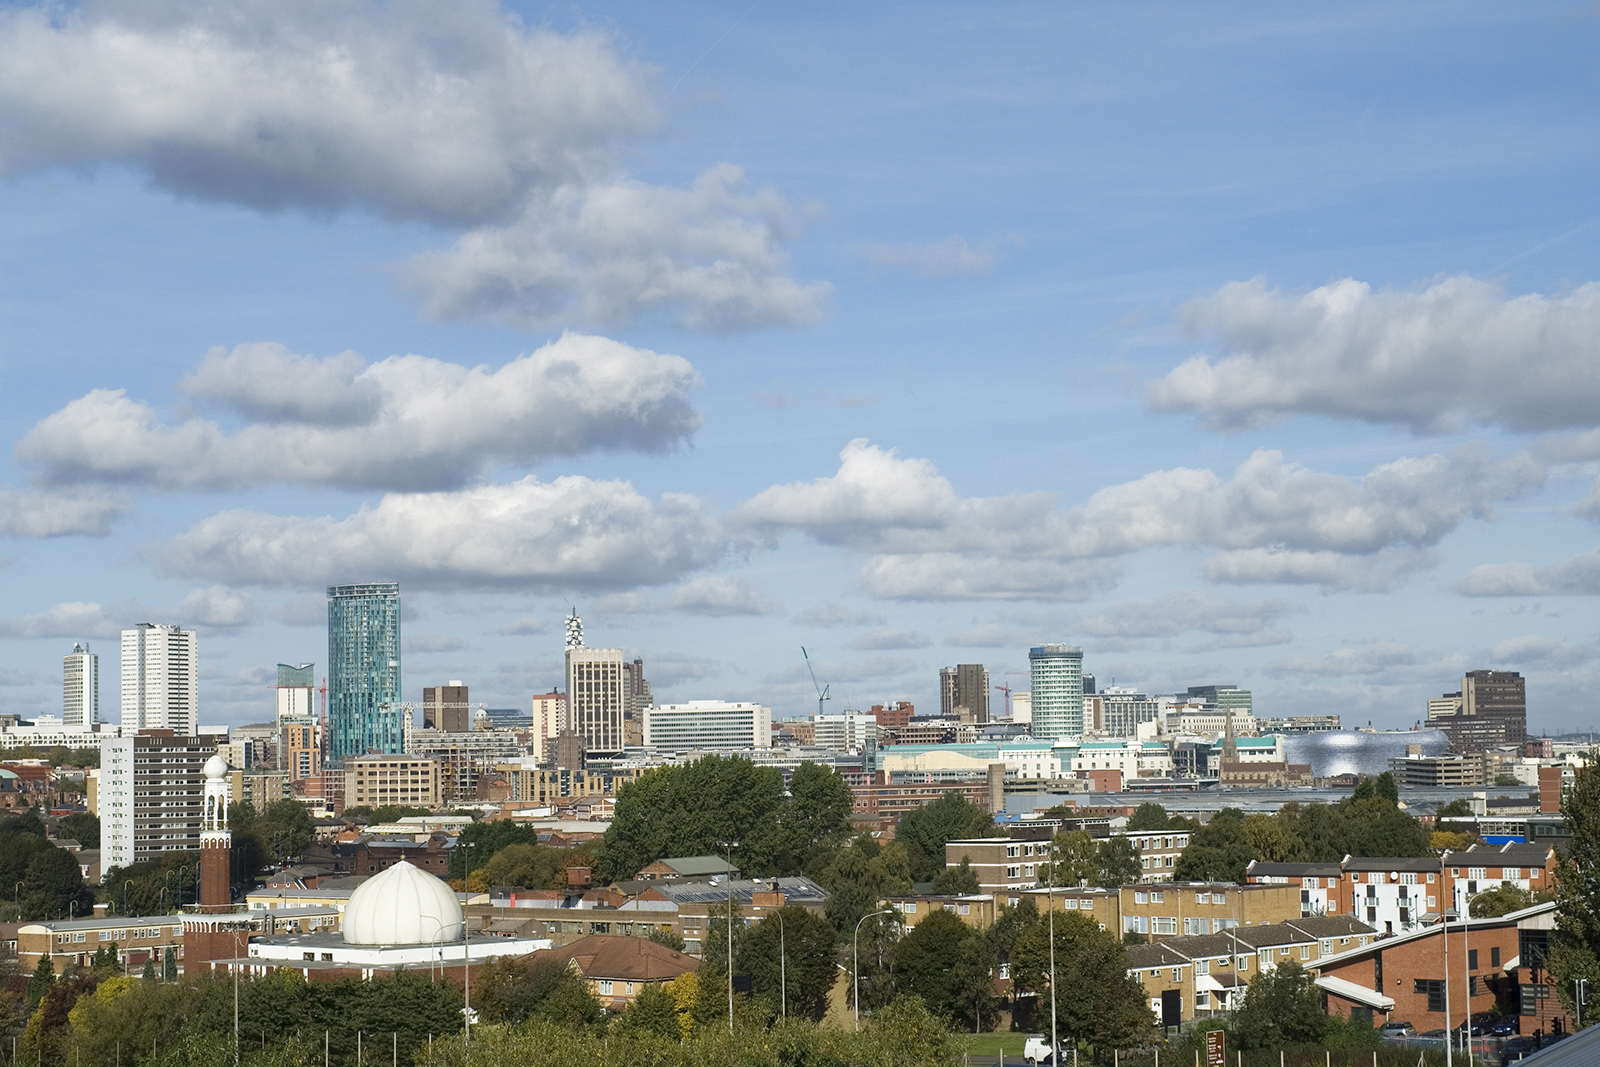 Skyline of Birmingham, West Midlands: one of the cities Conservative MP Paul Scully said was a 'no-go area' for non-Muslims.